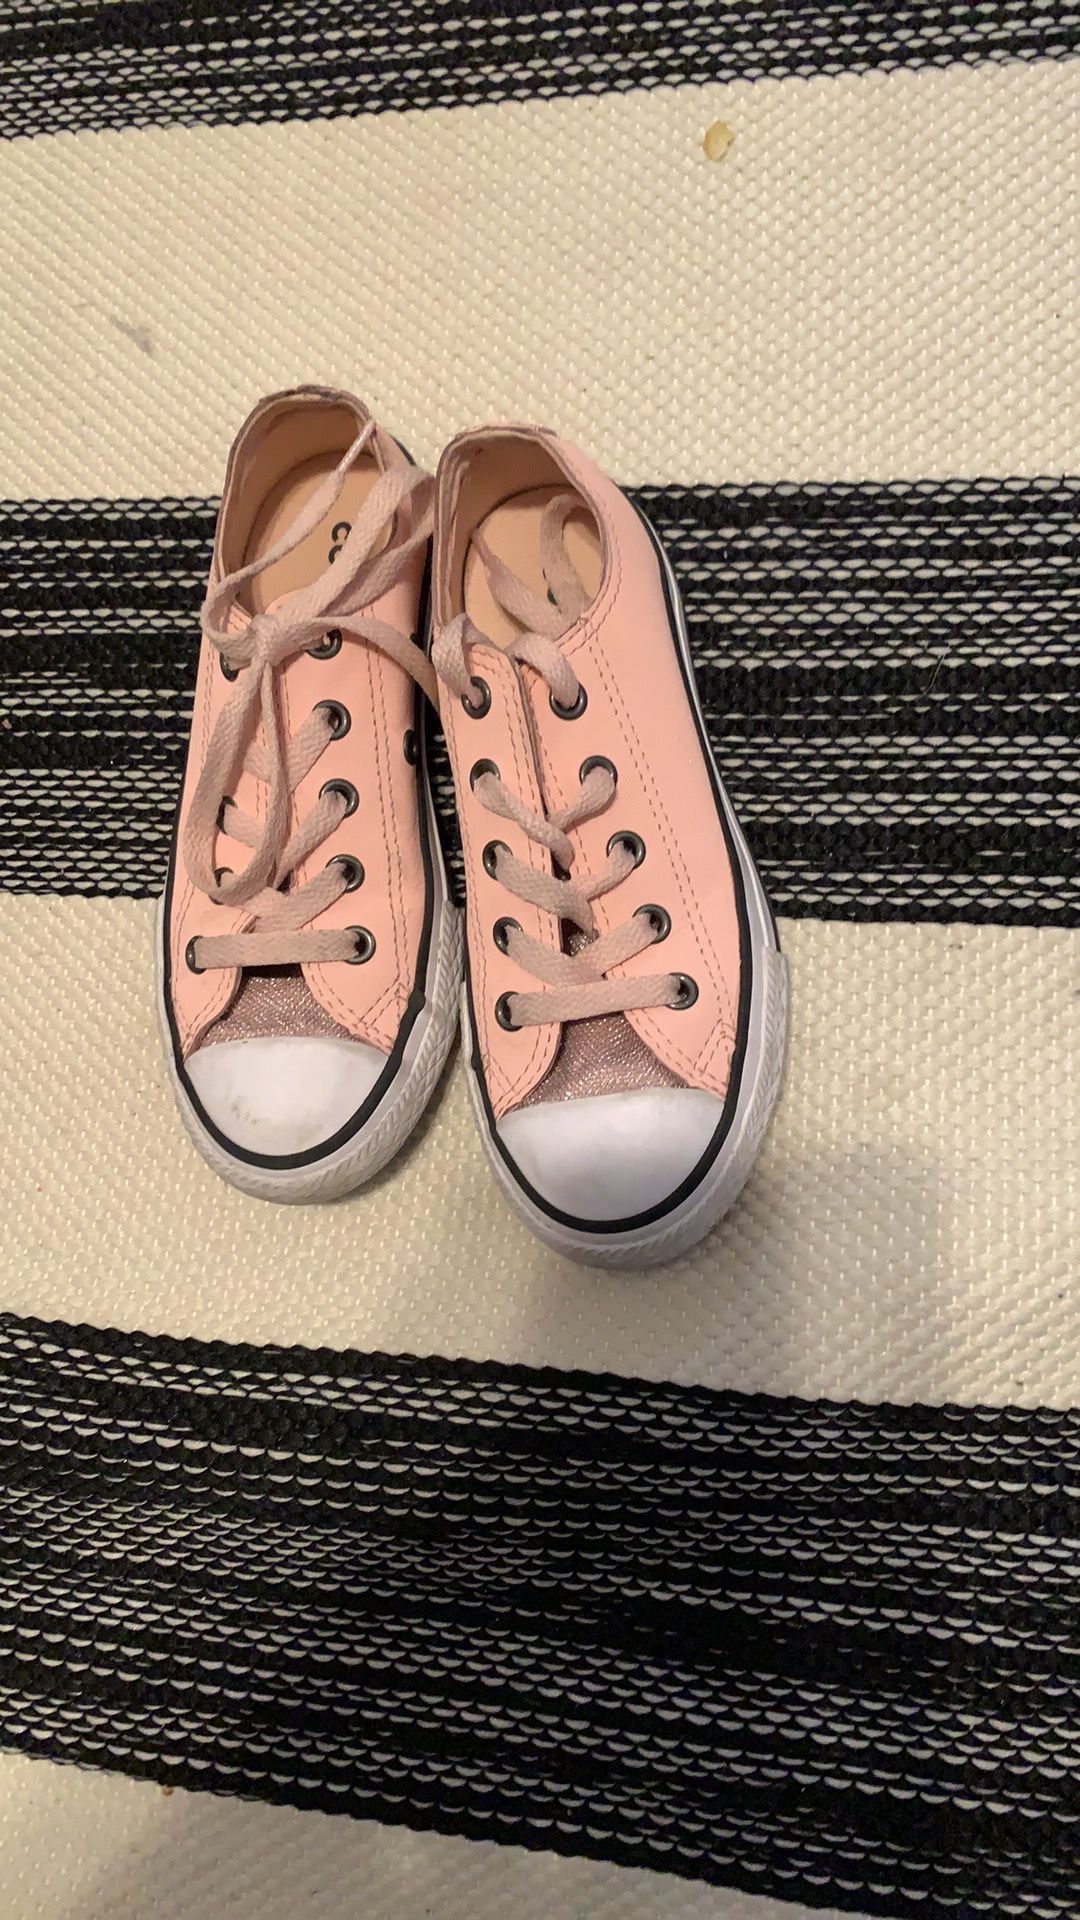 Converse All Star Ox Sparkle Pink Glitter Girls Trainers Size 12